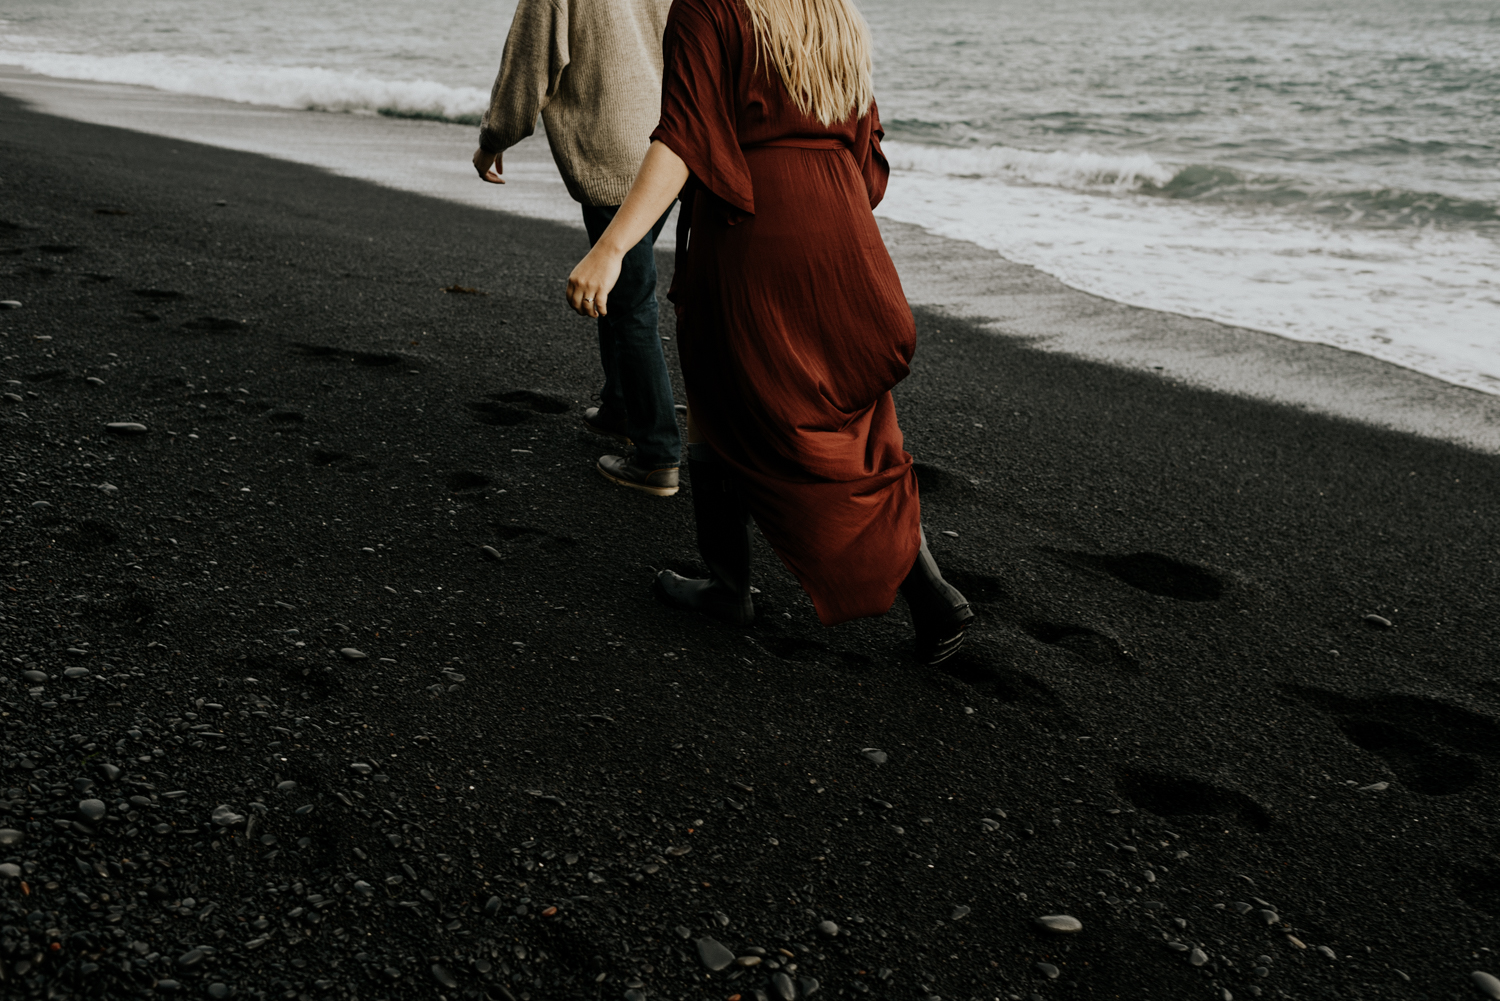 Black Sand beach Adventurous and fun Couples Session in Vik, Iceland